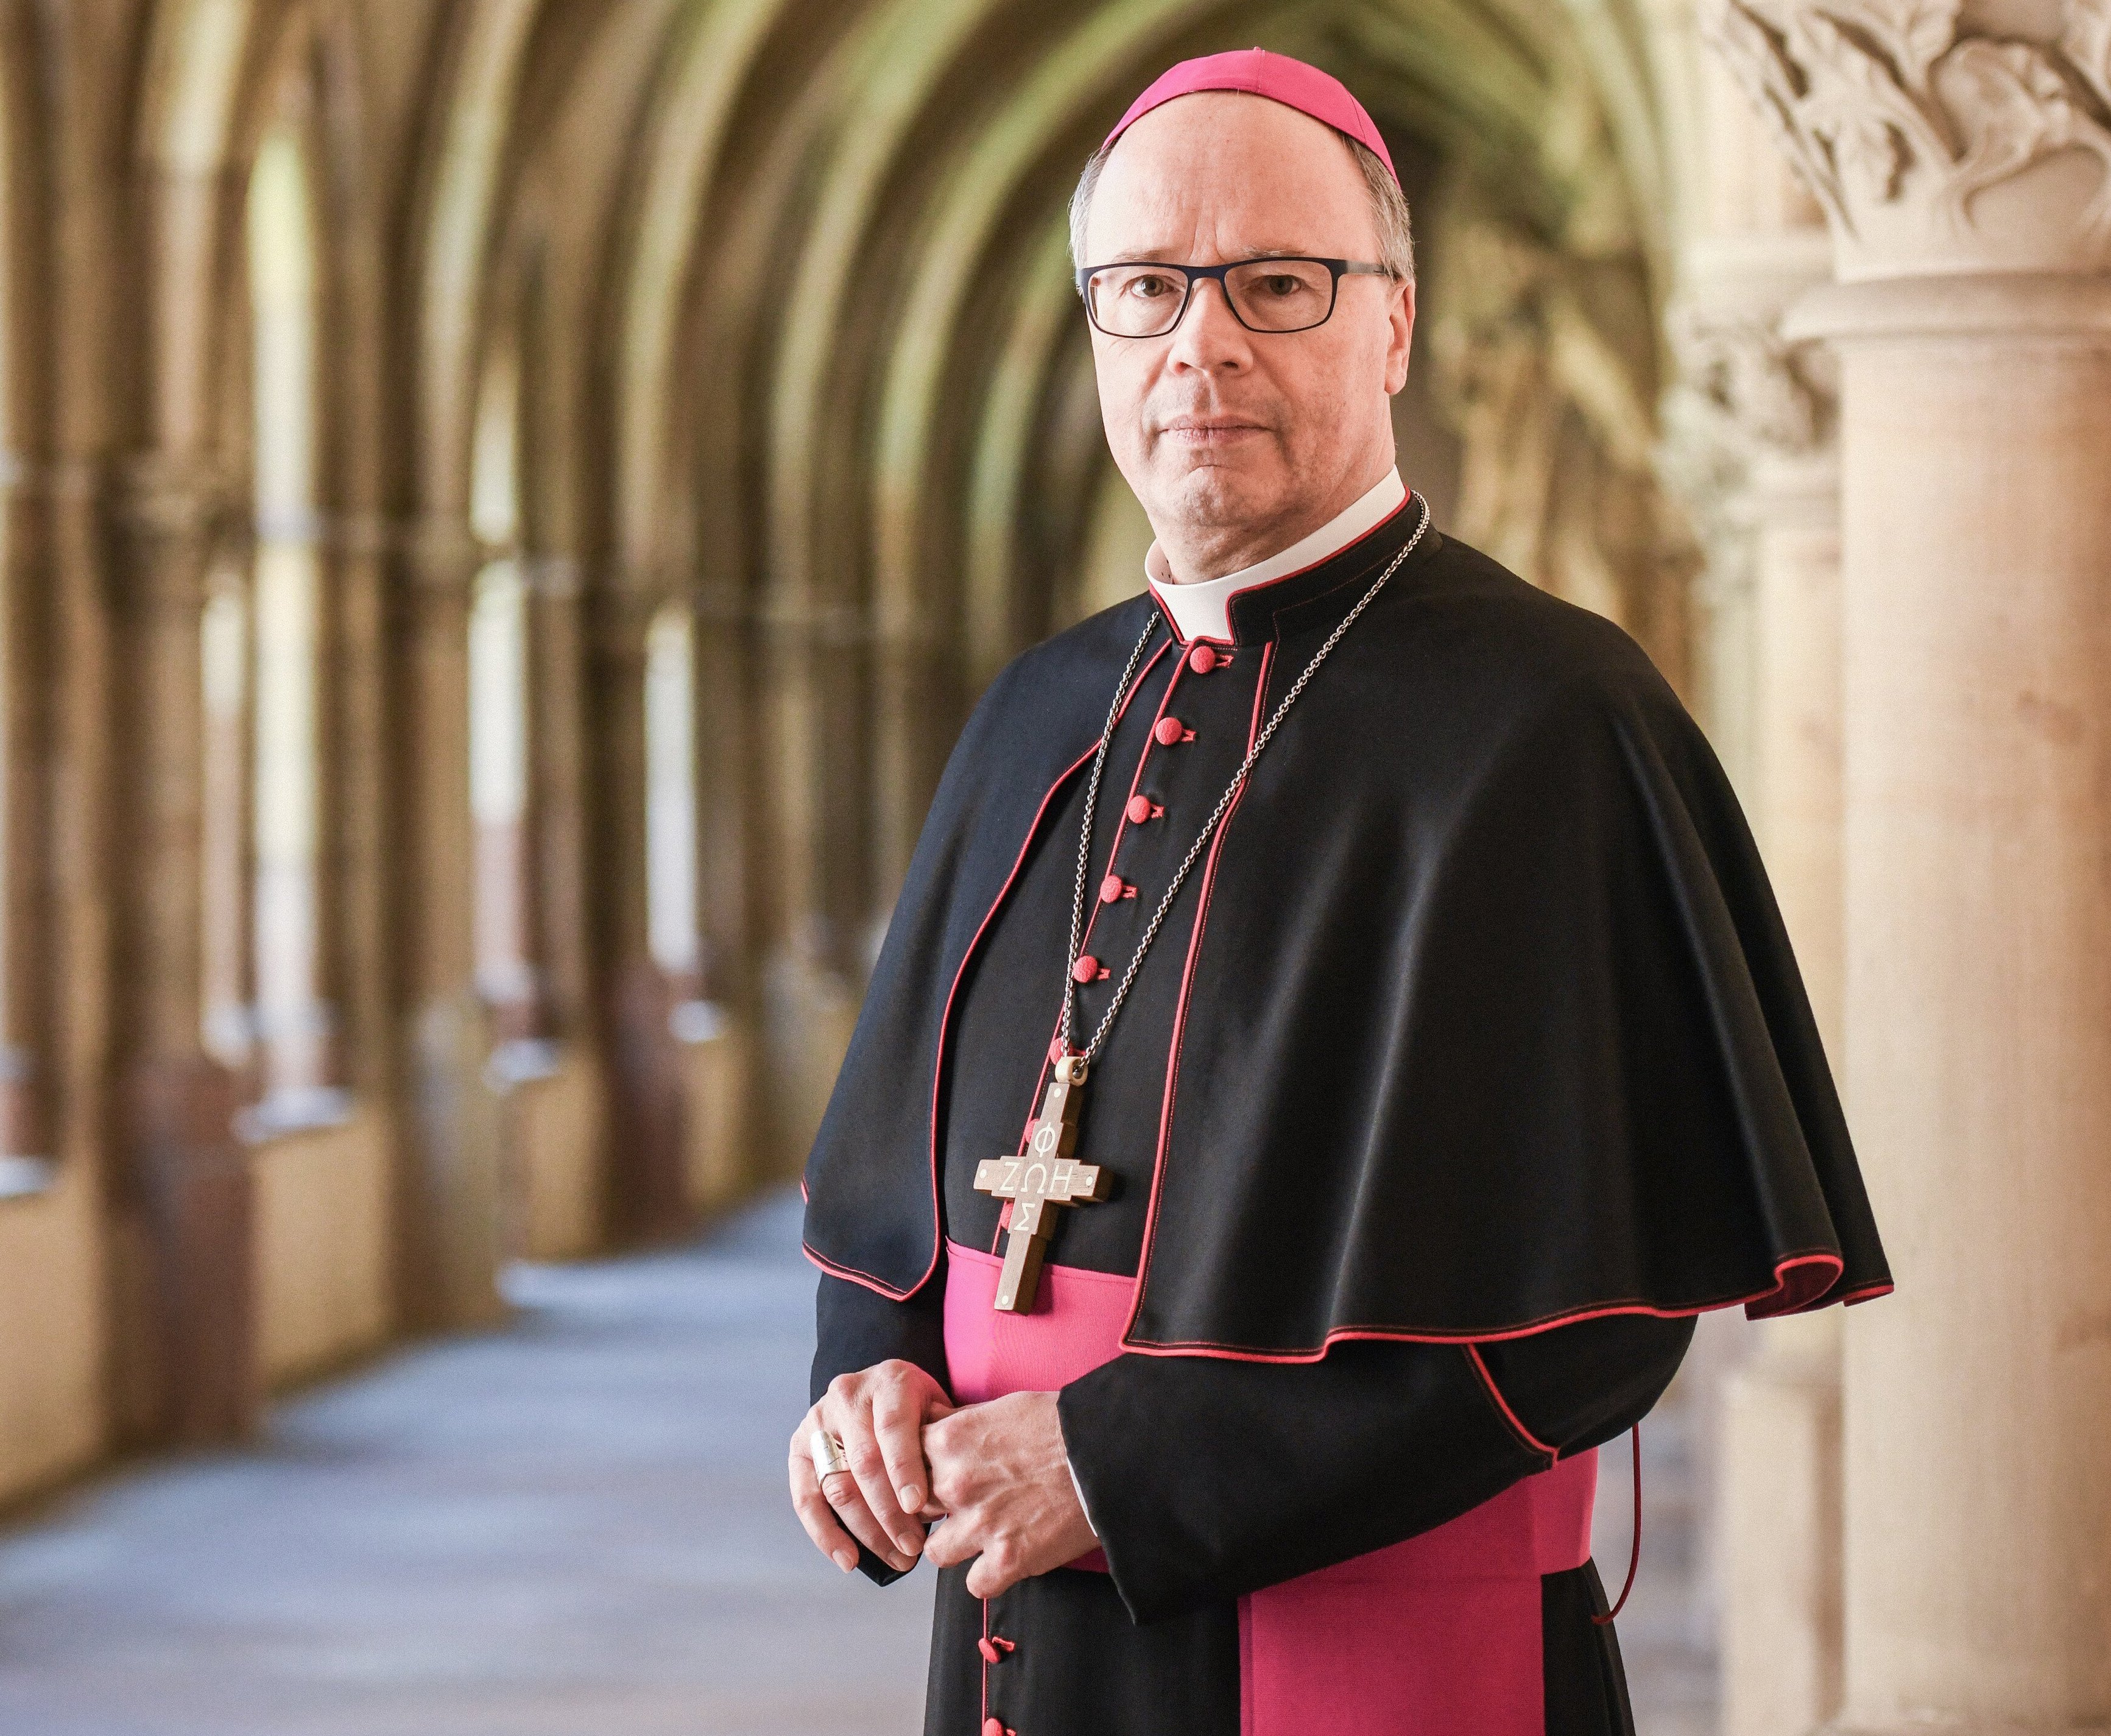 German Bishop Stephan Ackermann of Trier is pictured in a May 15, 2020, photo. (CNS photo/Julia Steinbrecht, KNA)